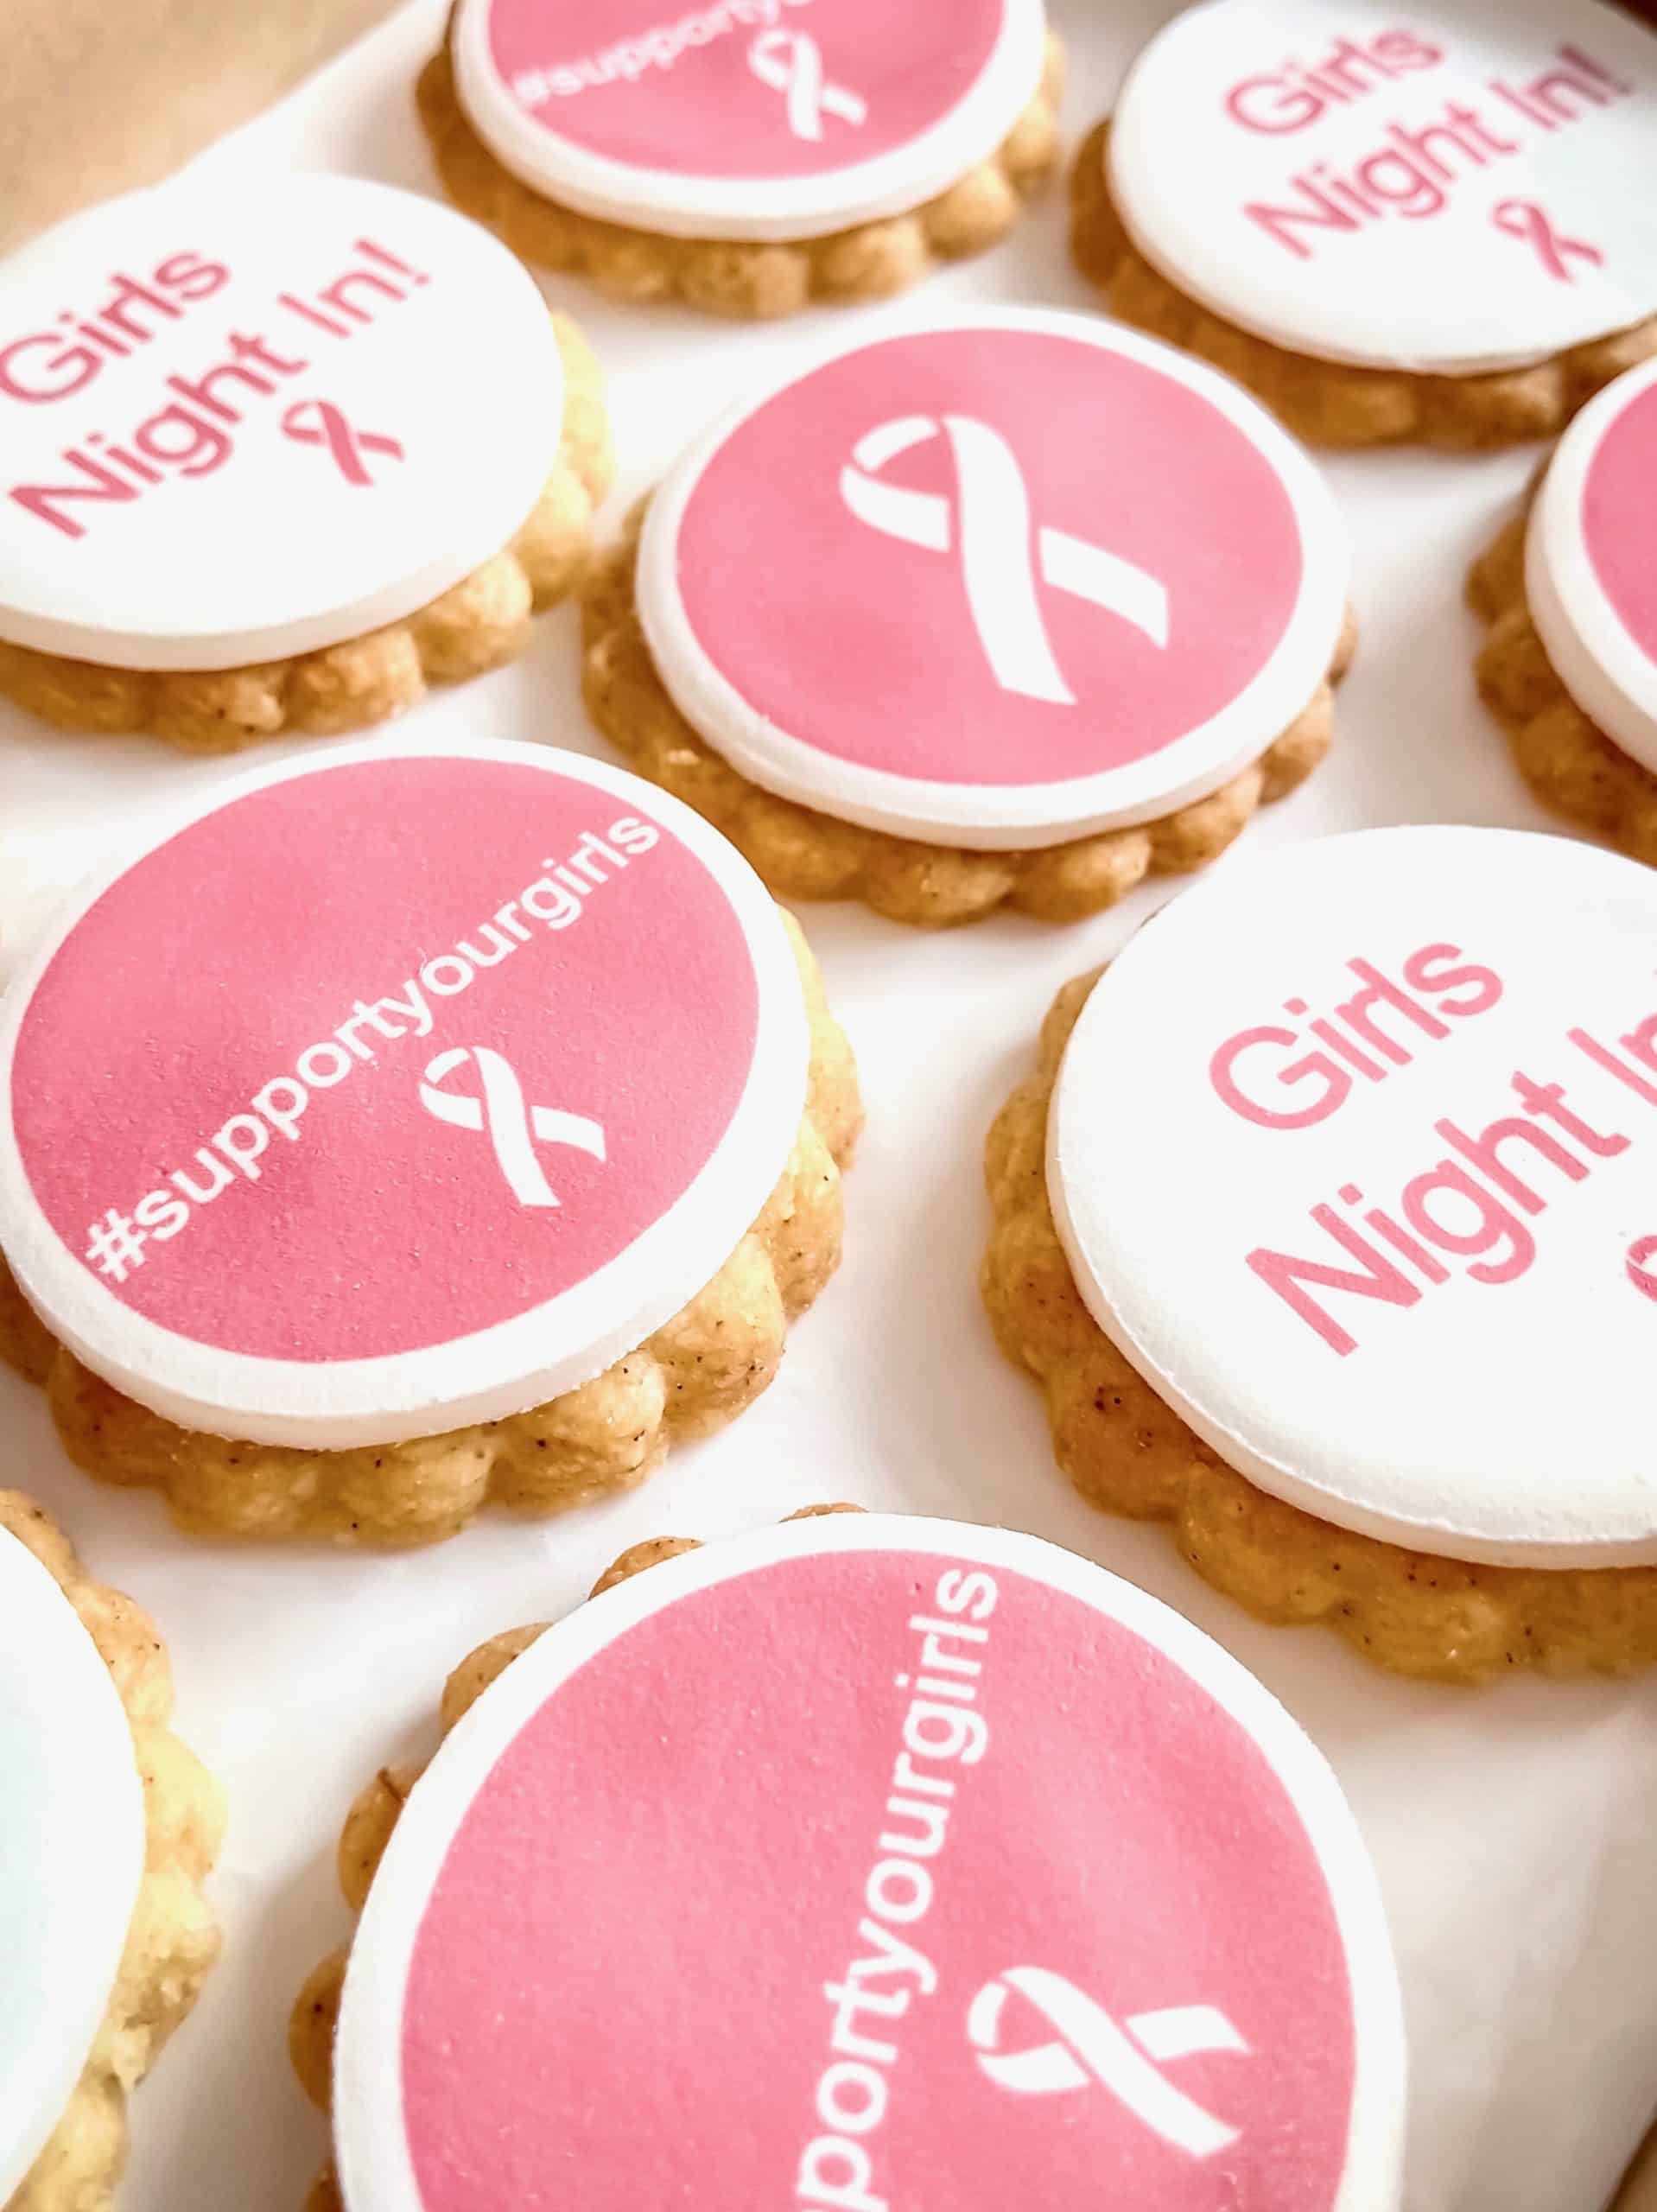 Cancer Focus NI #supportyourgirls Biscuit Box Gallery Image